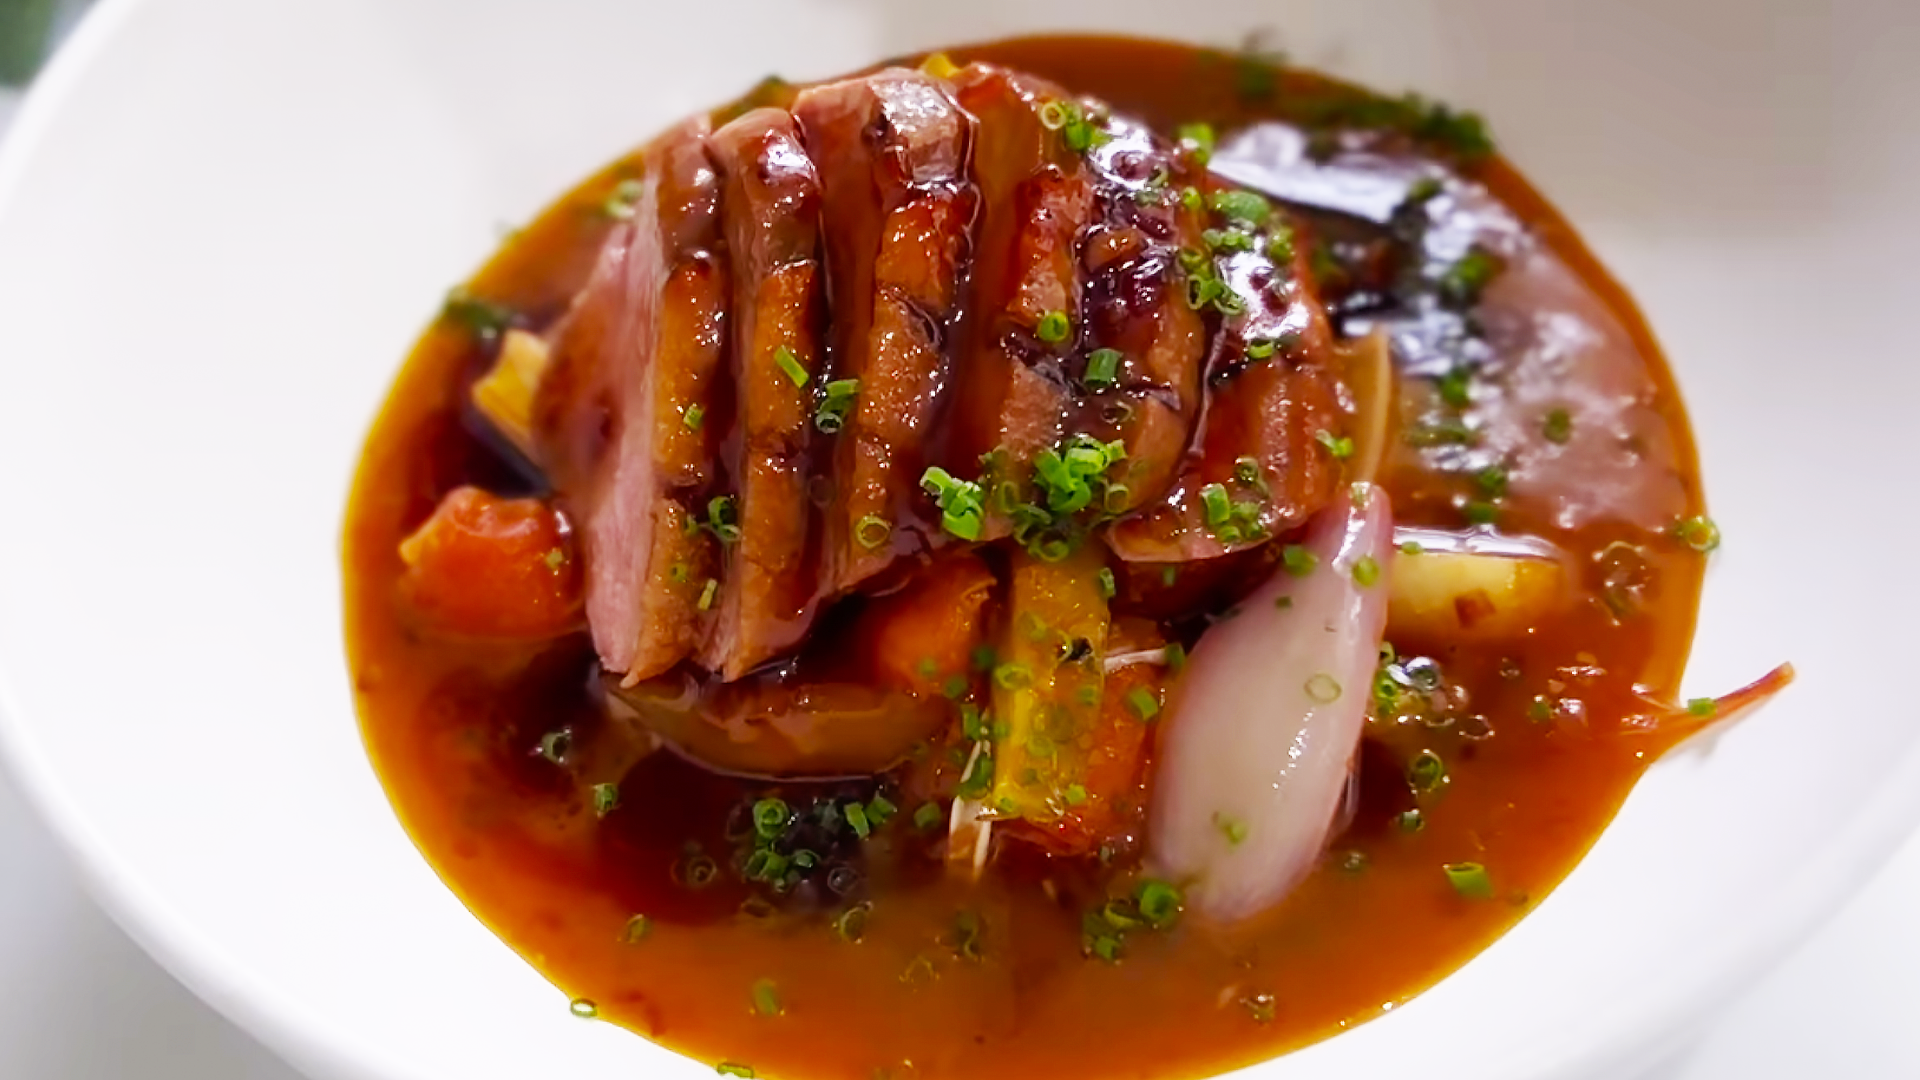 Sliced duck breast in an Asian sauce with vegetables sits on white plate.